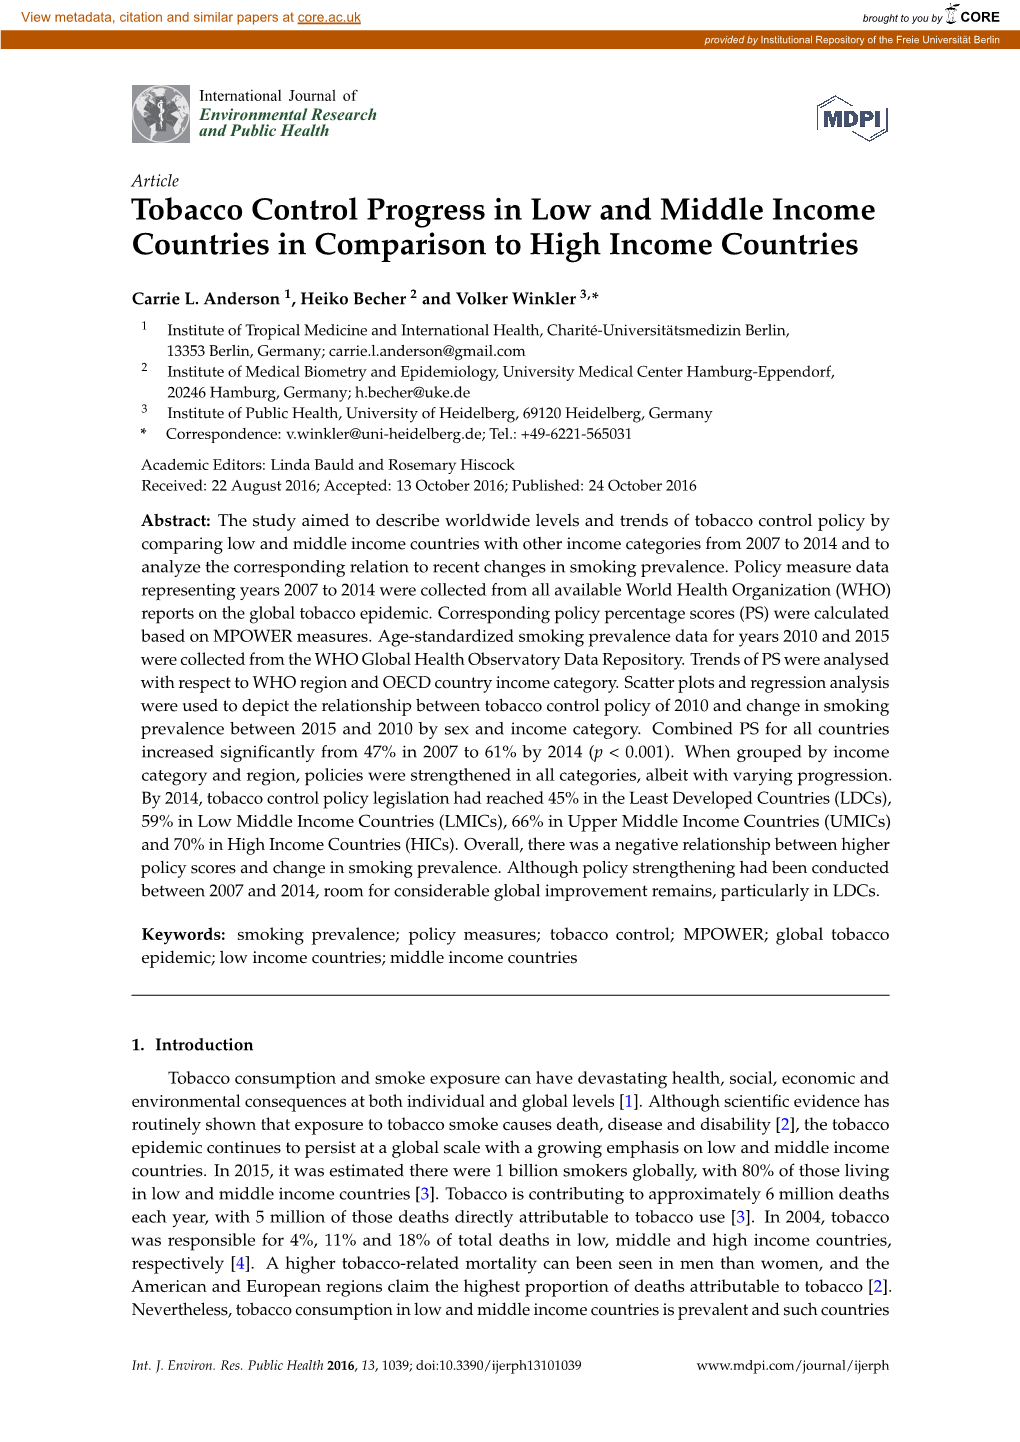 Tobacco Control Progress in Low and Middle Income Countries in Comparison to High Income Countries